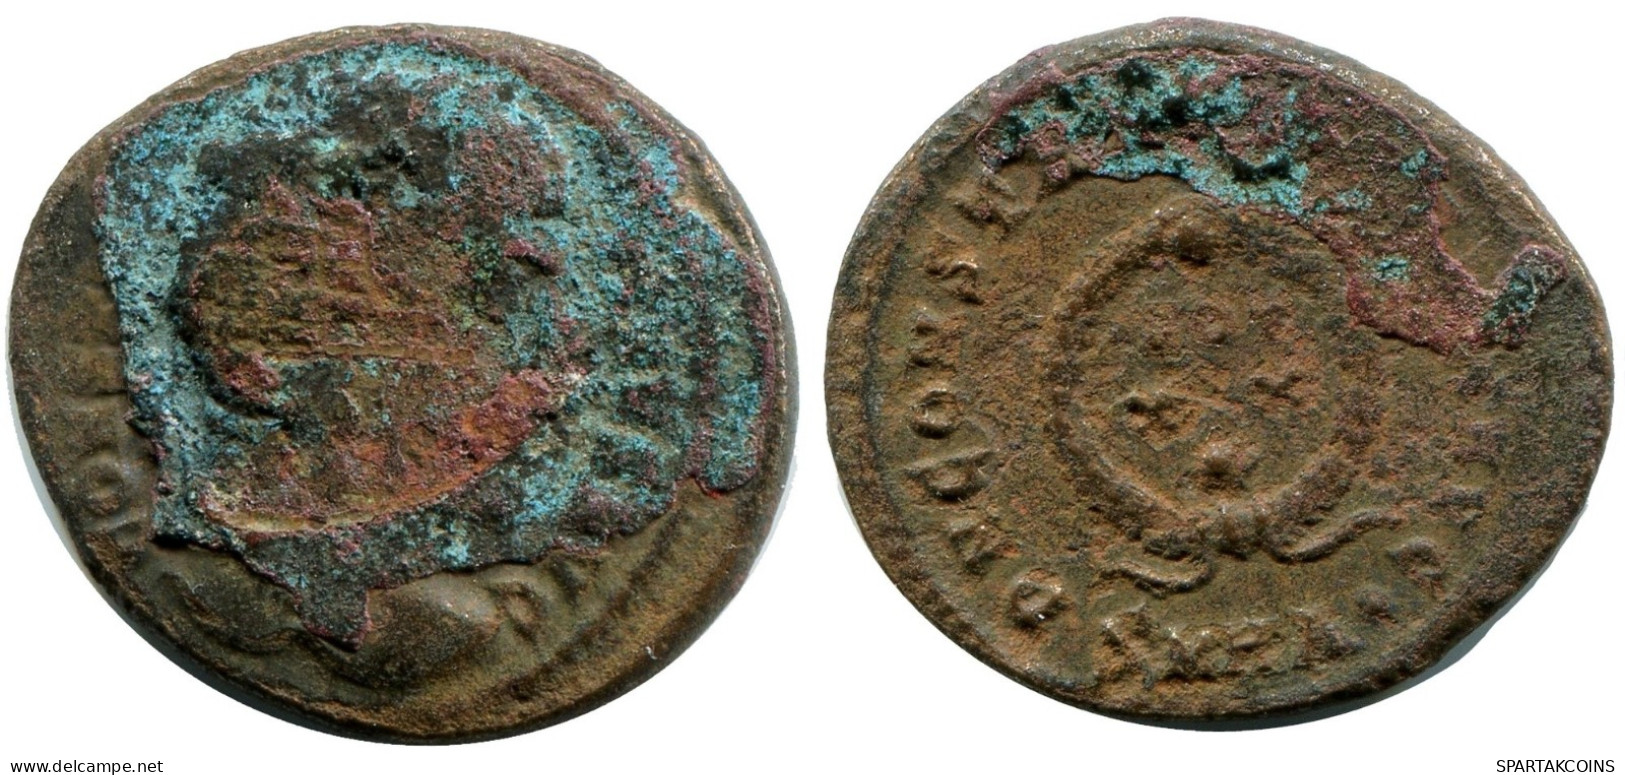 CONSTANTINE I MINTED IN HERACLEA FROM THE ROYAL ONTARIO MUSEUM #ANC11202.14.U.A - L'Empire Chrétien (307 à 363)